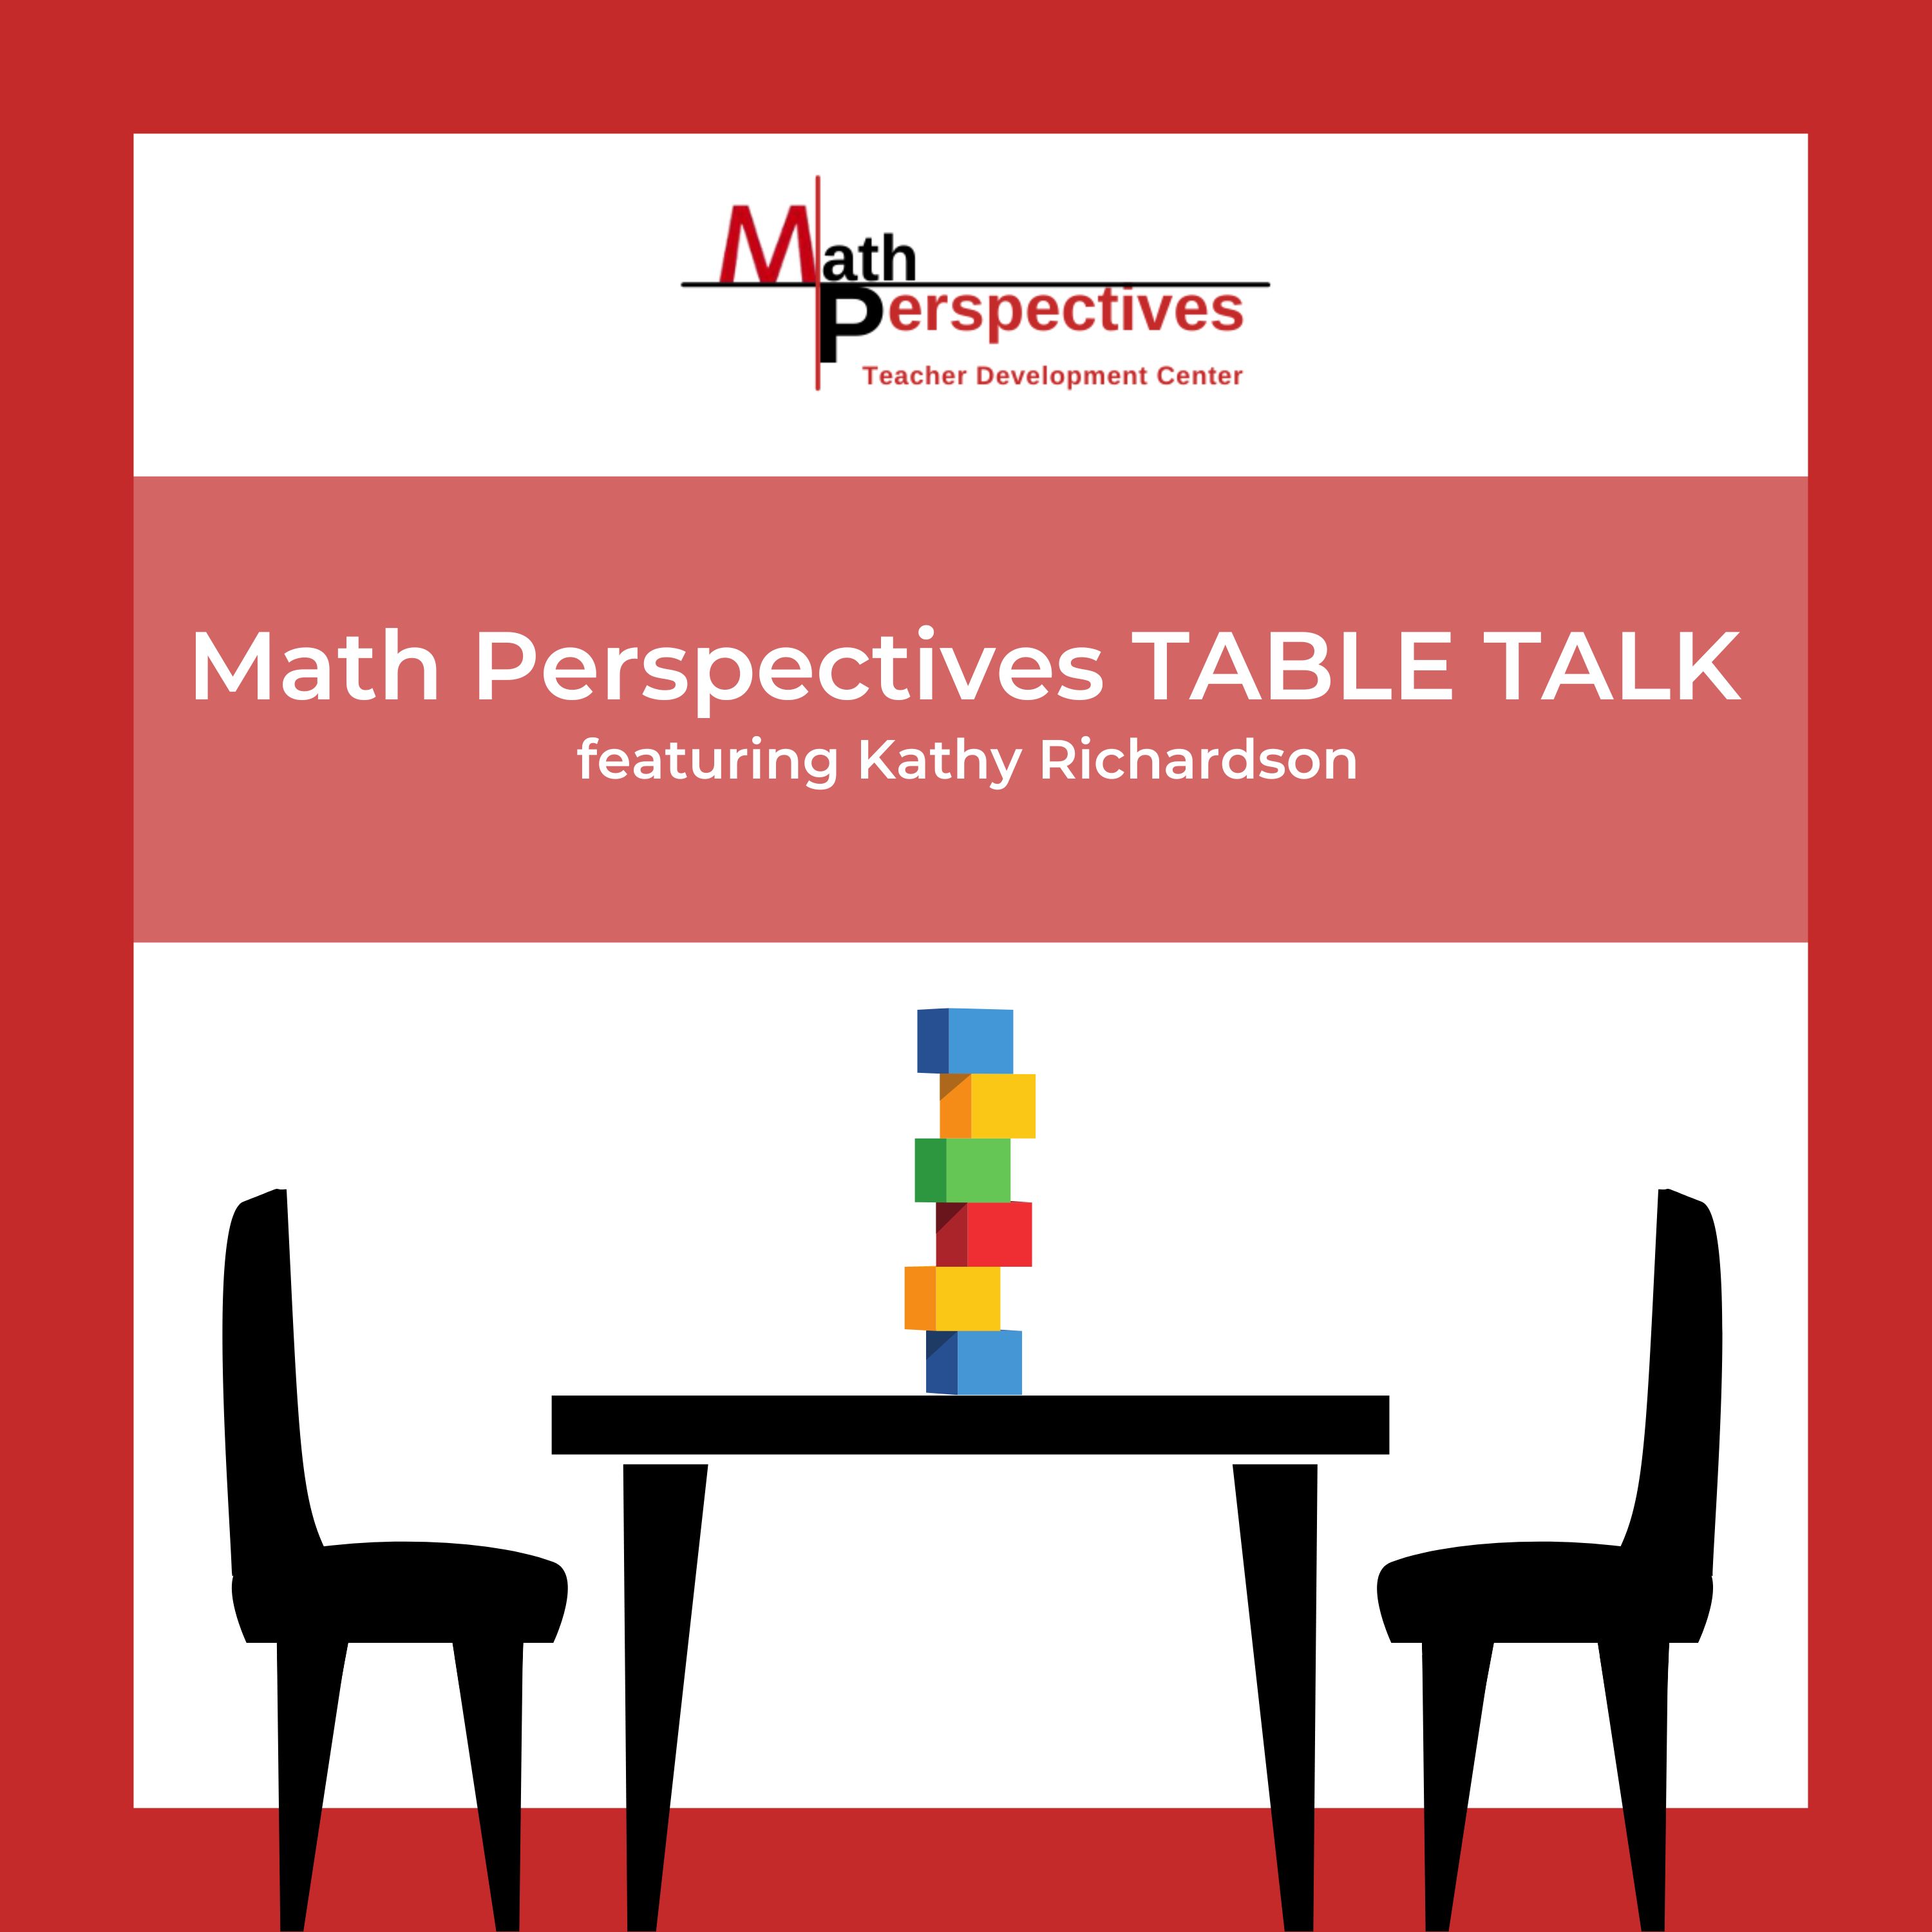 Artwork for Math Perspectives Table Talk